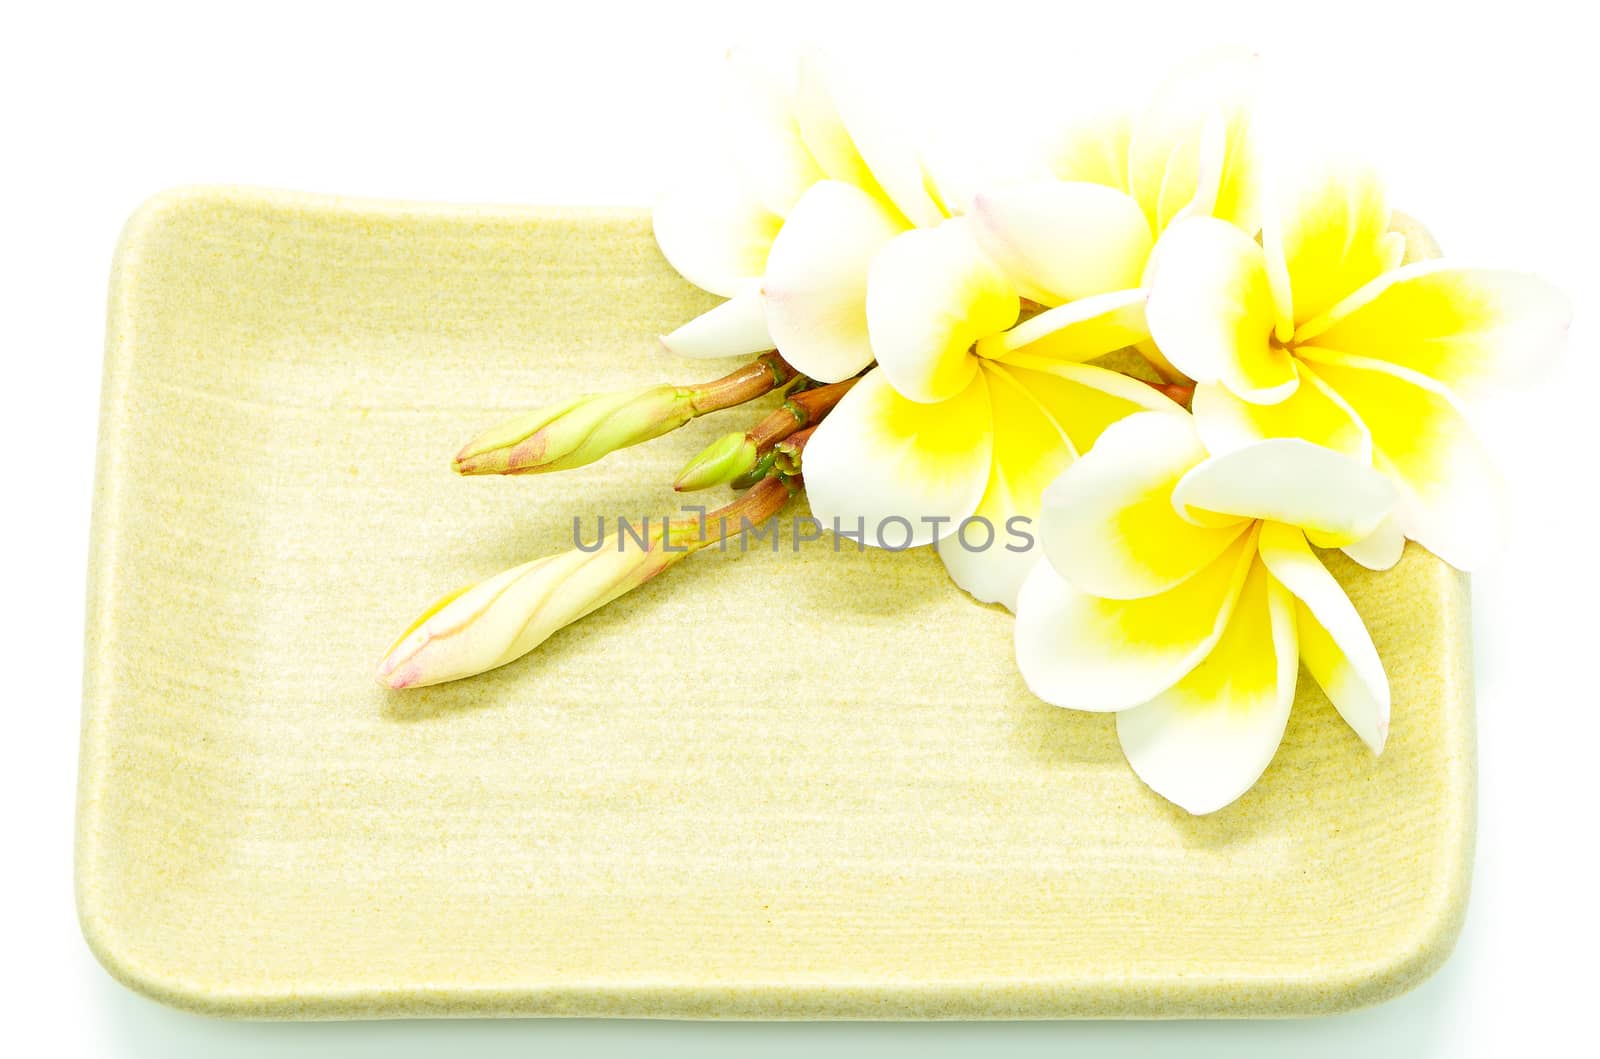 Blossom of yellow Plumeria flower, on the plate, isolated on a white background